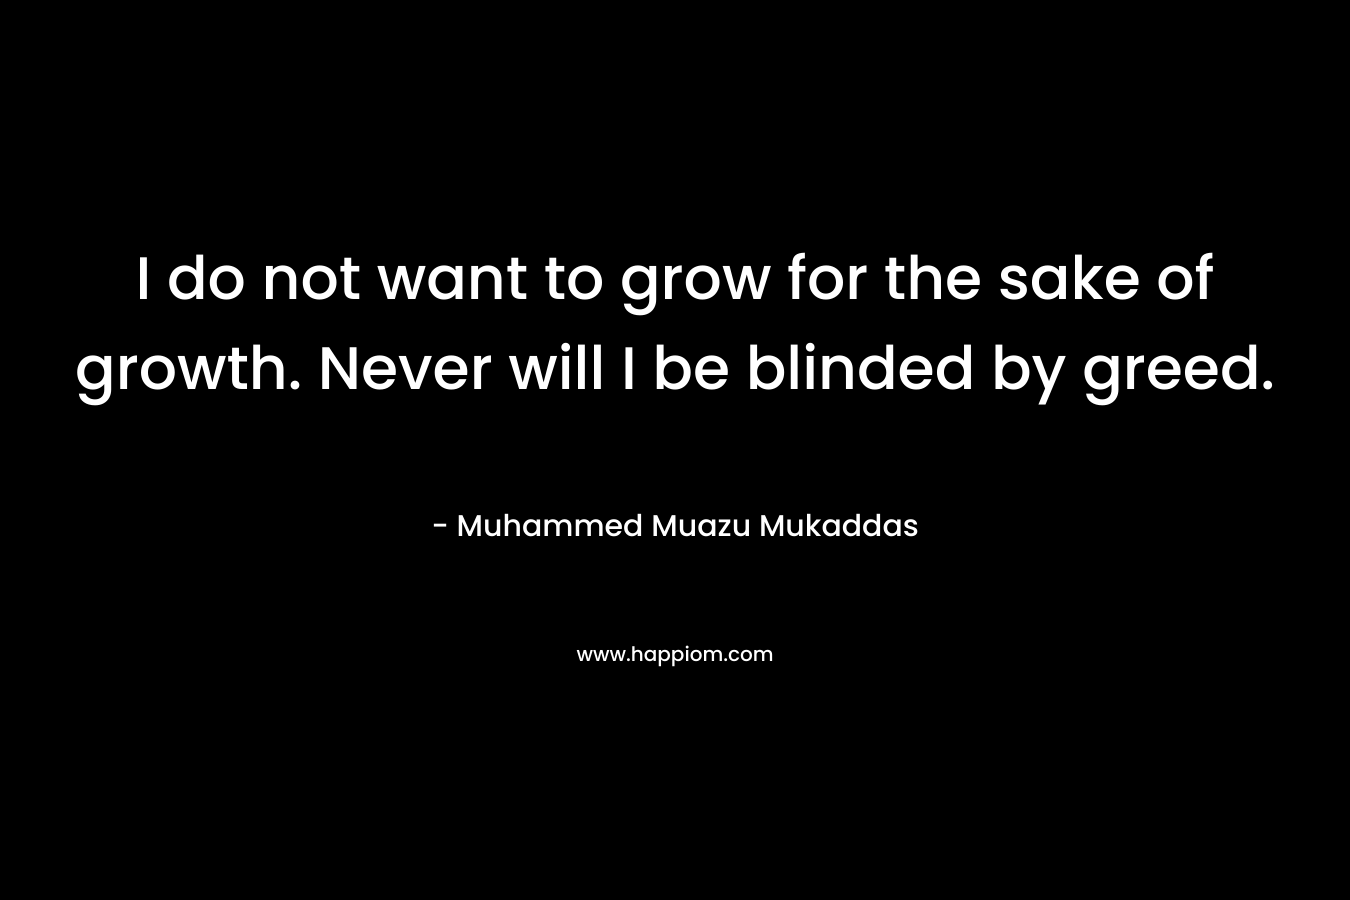 I do not want to grow for the sake of growth. Never will I be blinded by greed.